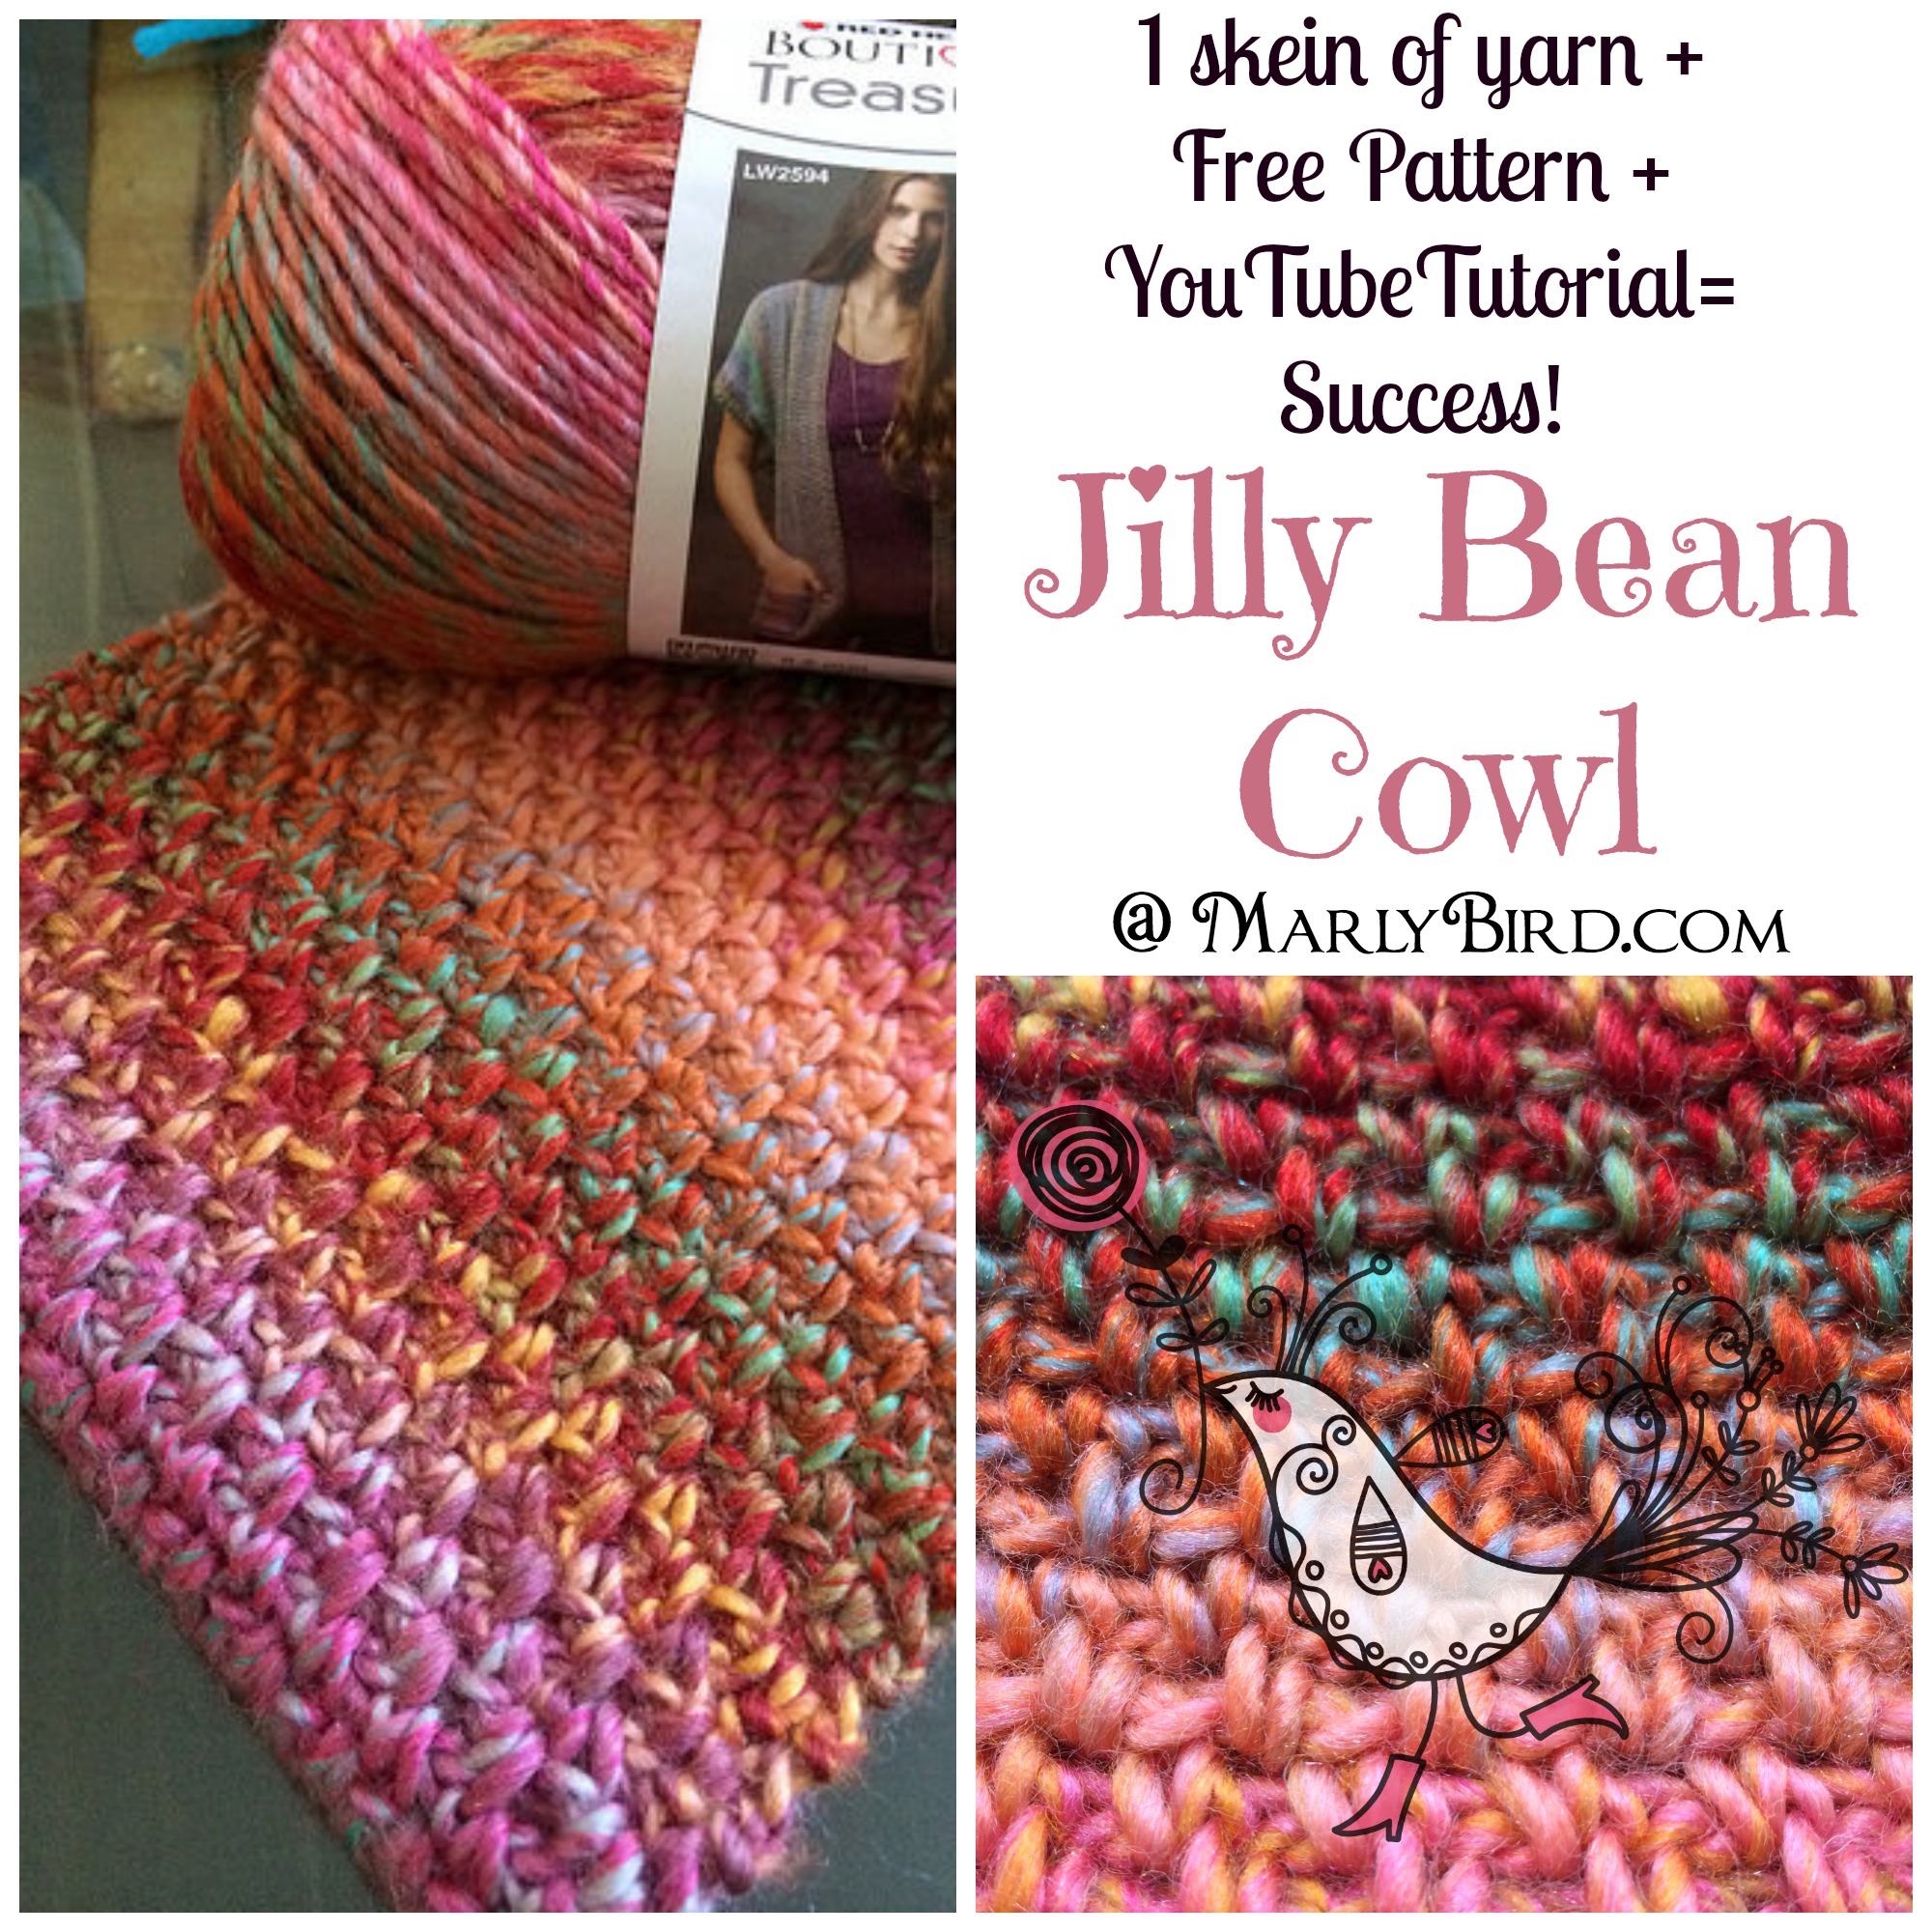 Jilly Bean Cowl Pattern by Marly Bird. Available at www.MarlyBird.com